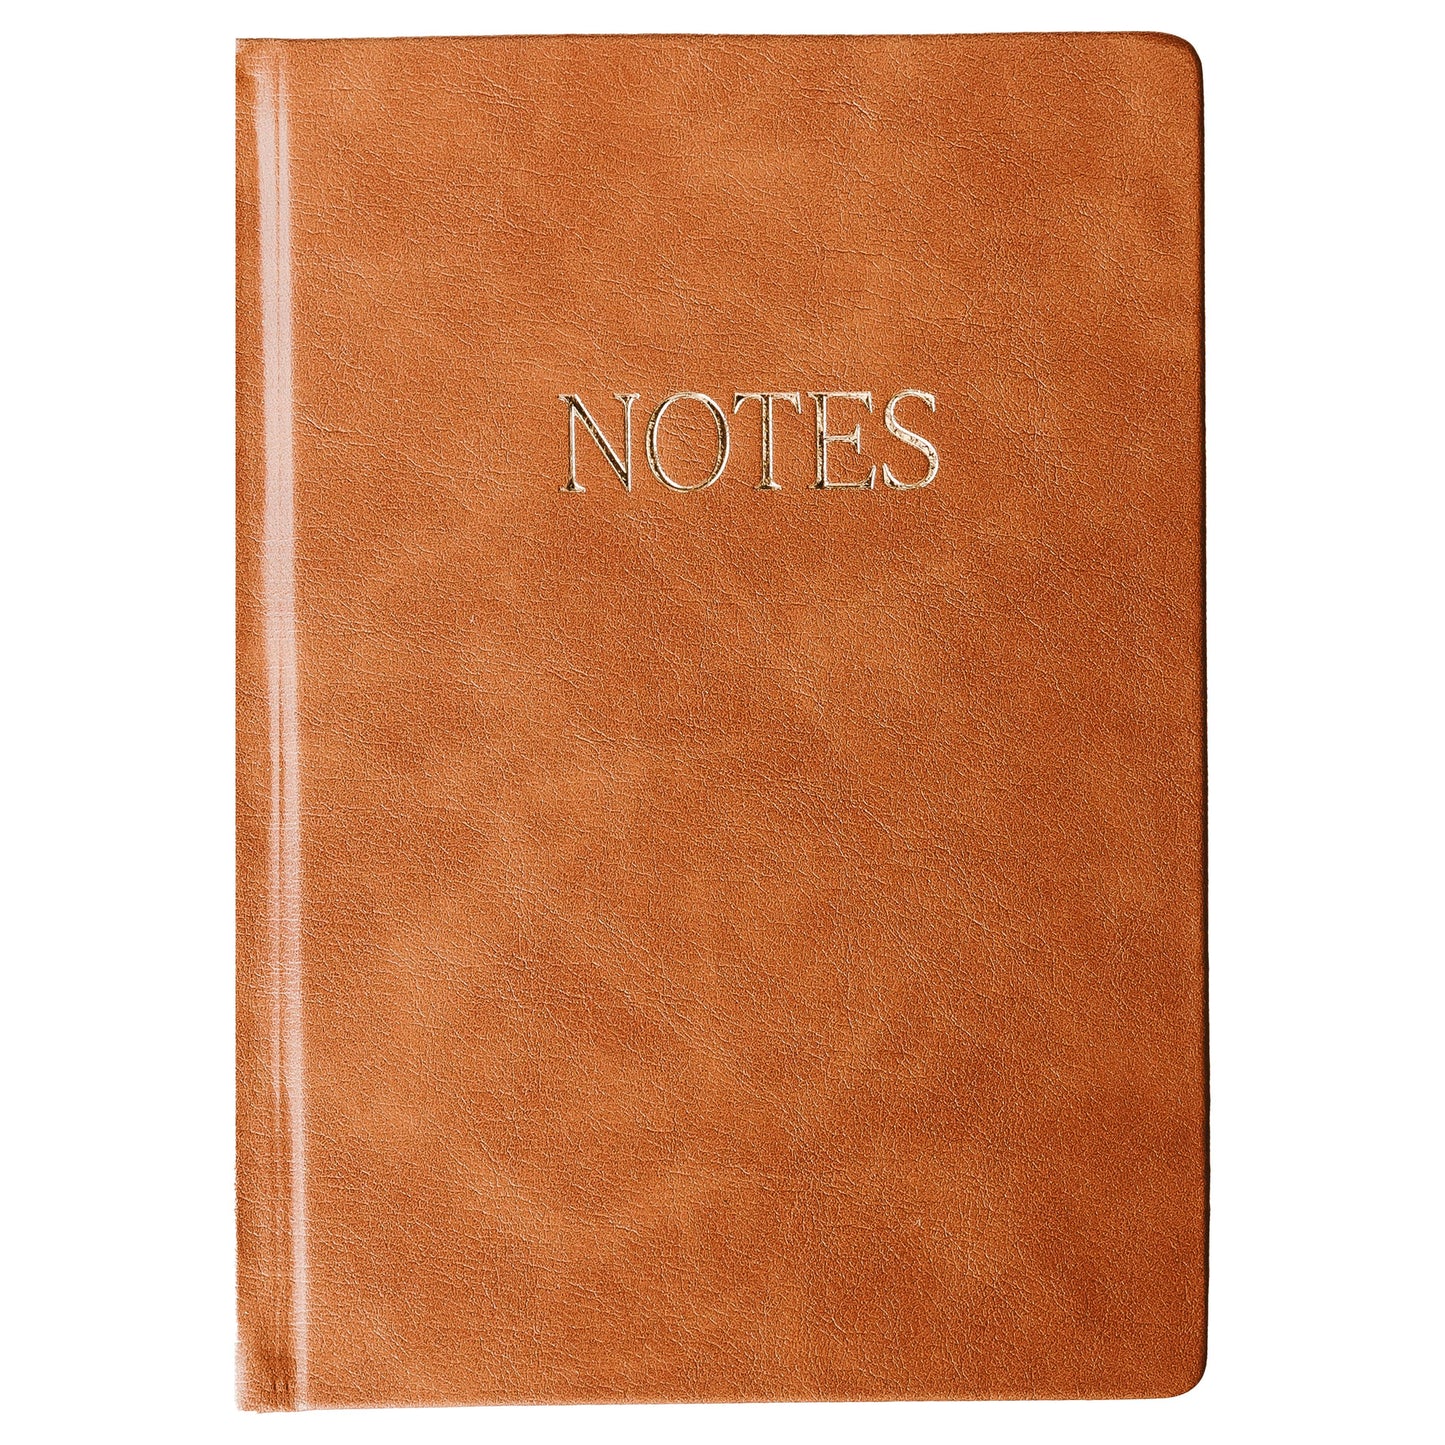 Sweet Water Decor - Notes Journal - Home Decor & Gifts